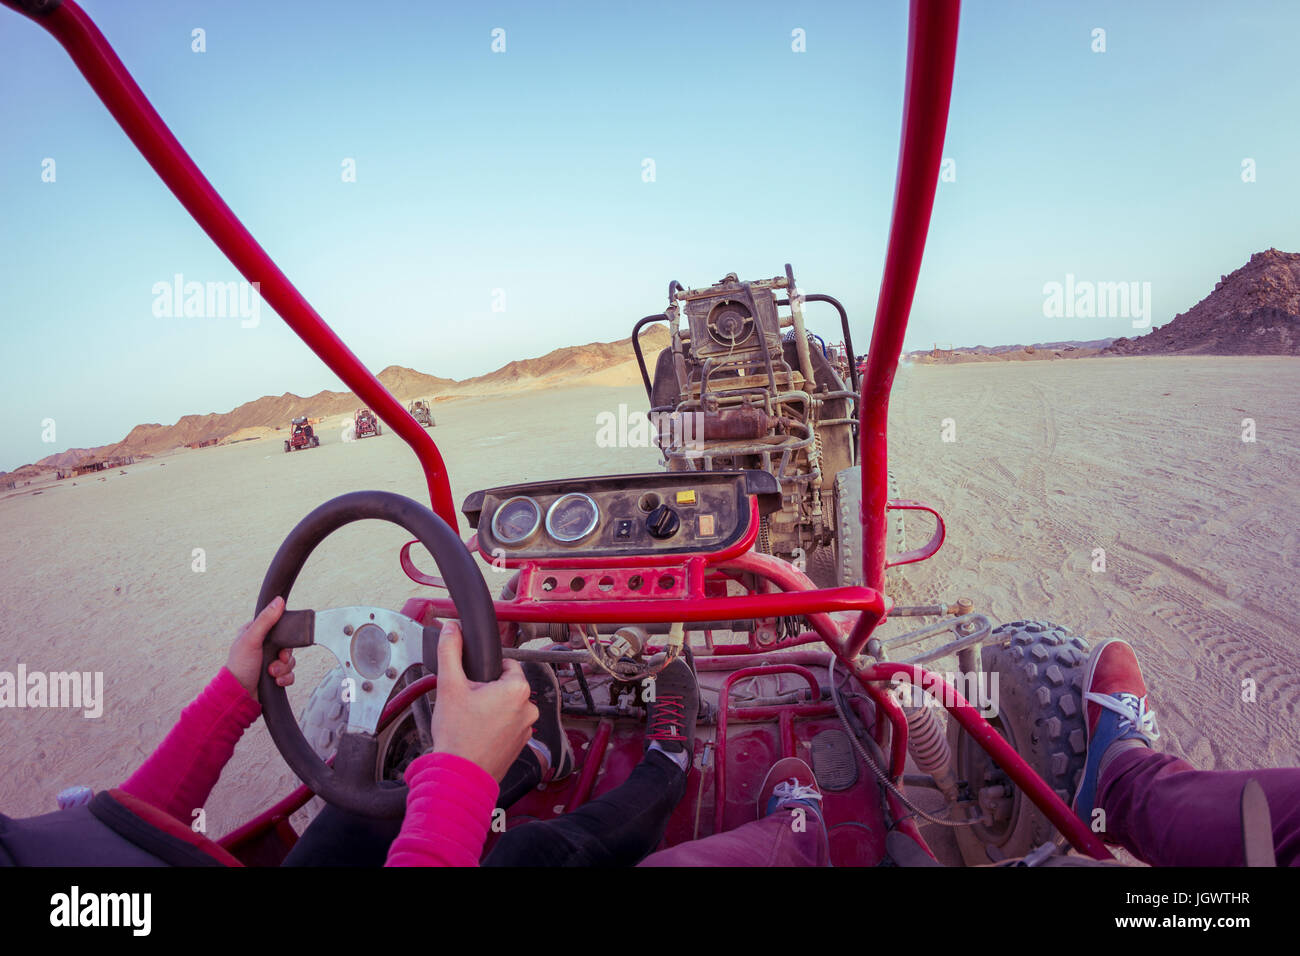 Personal perspective view of two people driving beach buggy in desert, Hurghada, Al Bahr al Ahmar, Egypt Stock Photo